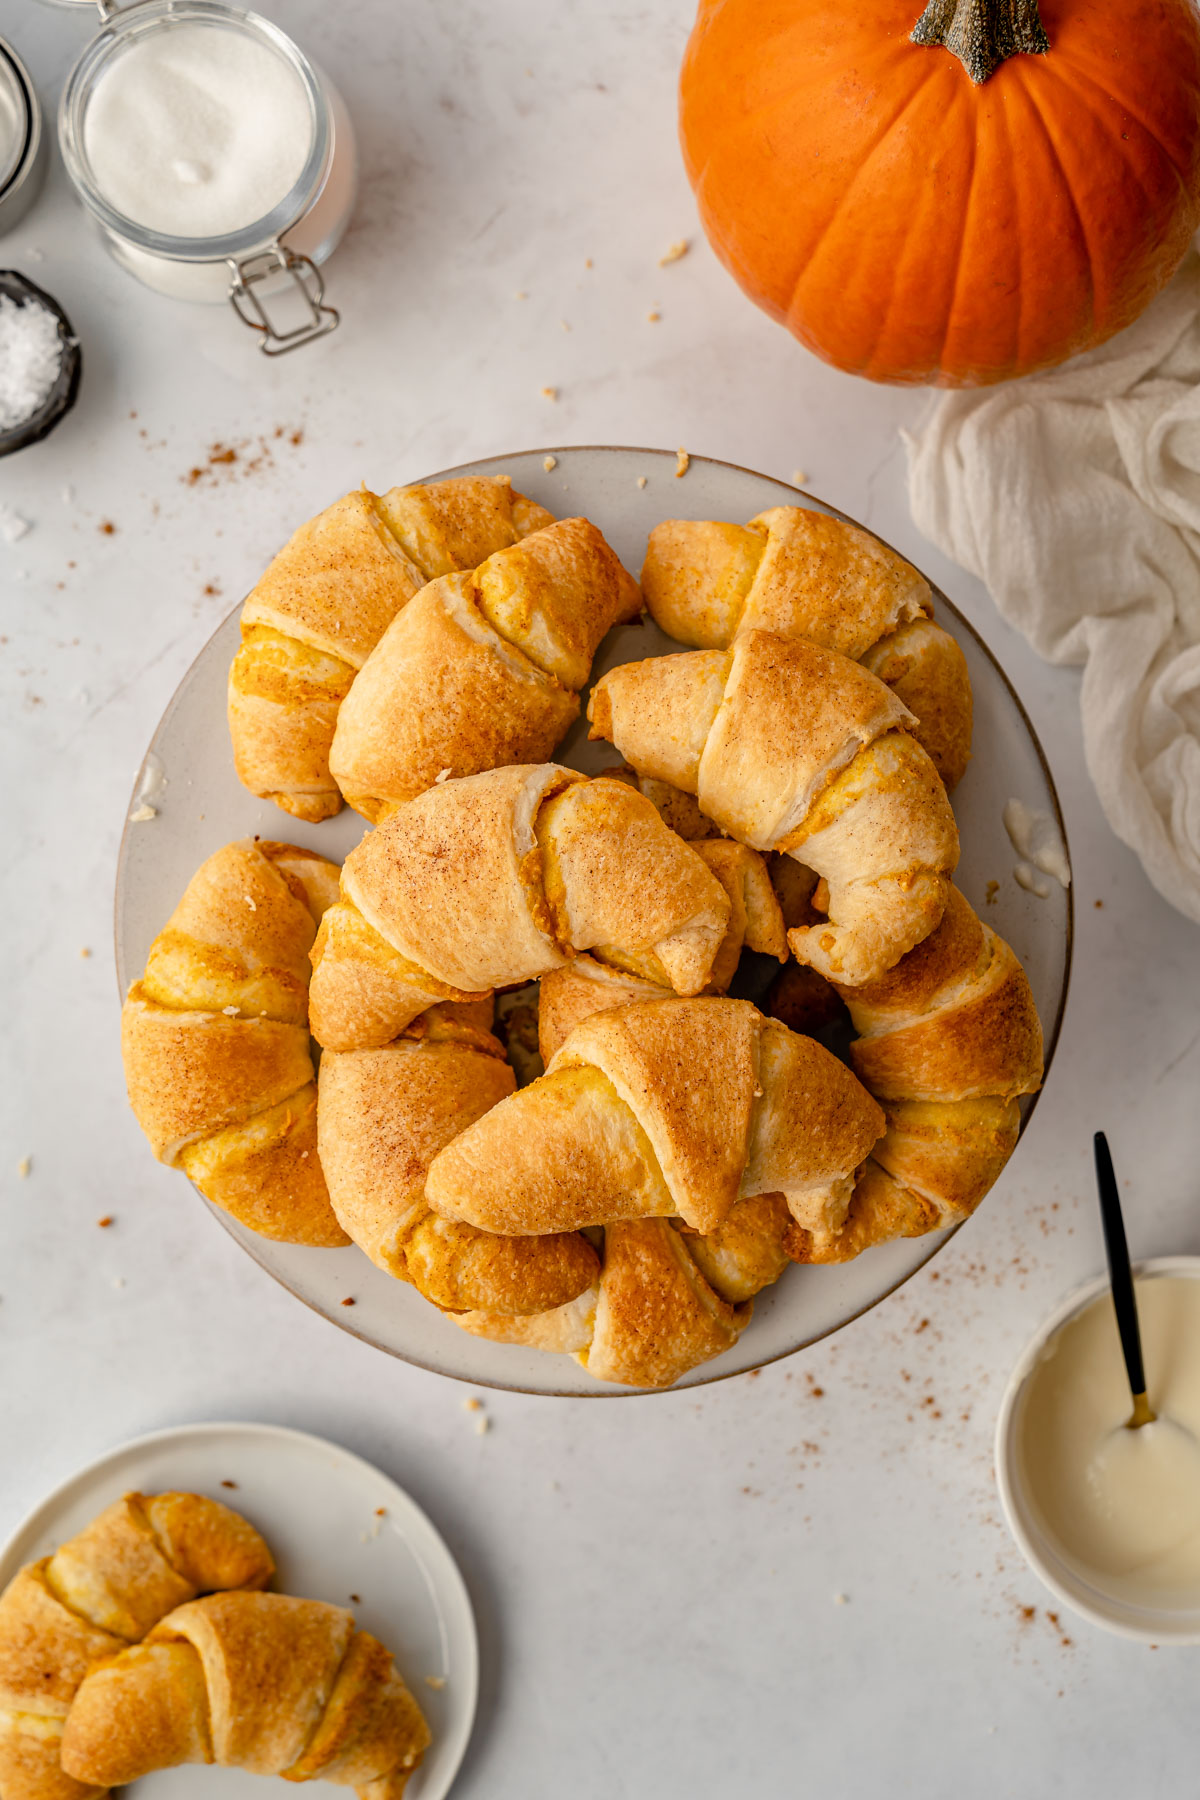 Pumpkin cream cheese crescent rolls on a cake stand with frosting, plates, pumpkin, and linen on the side.